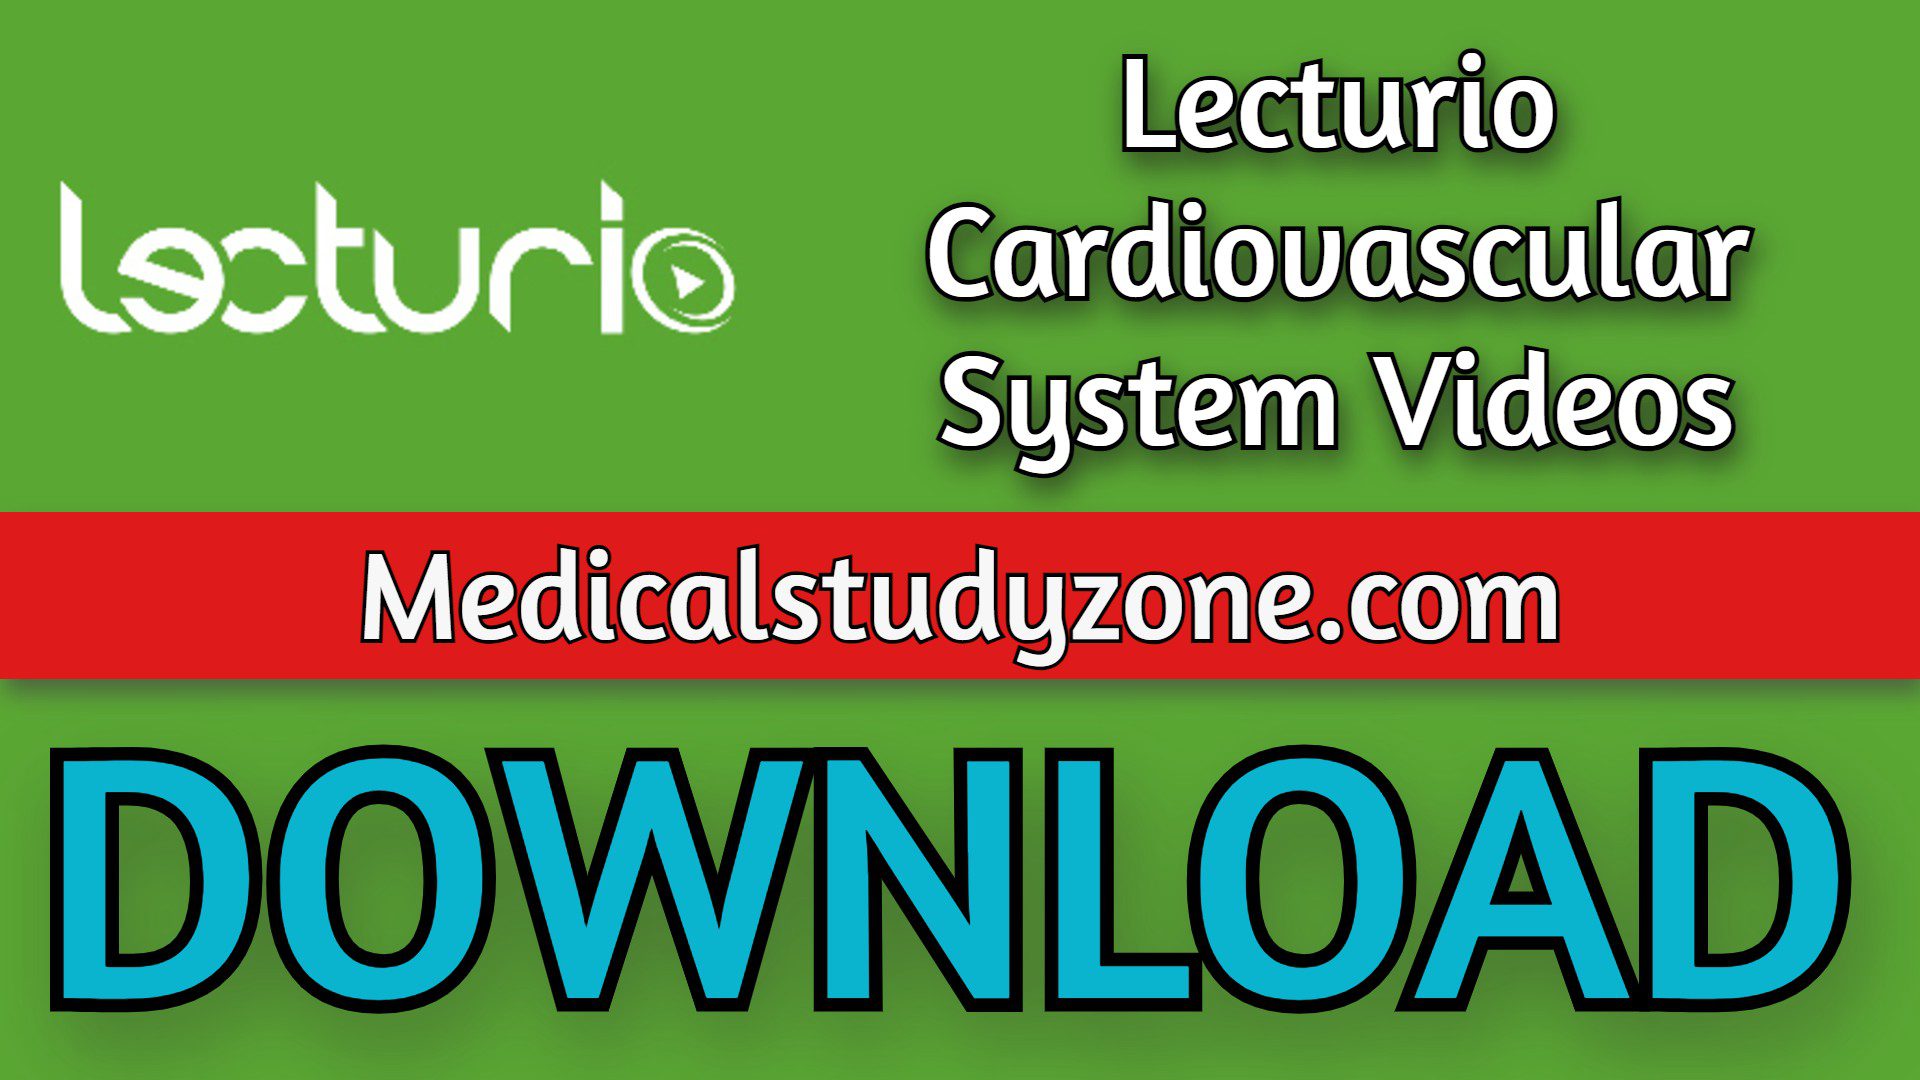 Lecturio Cardiovascular System Videos 2021 Free Download